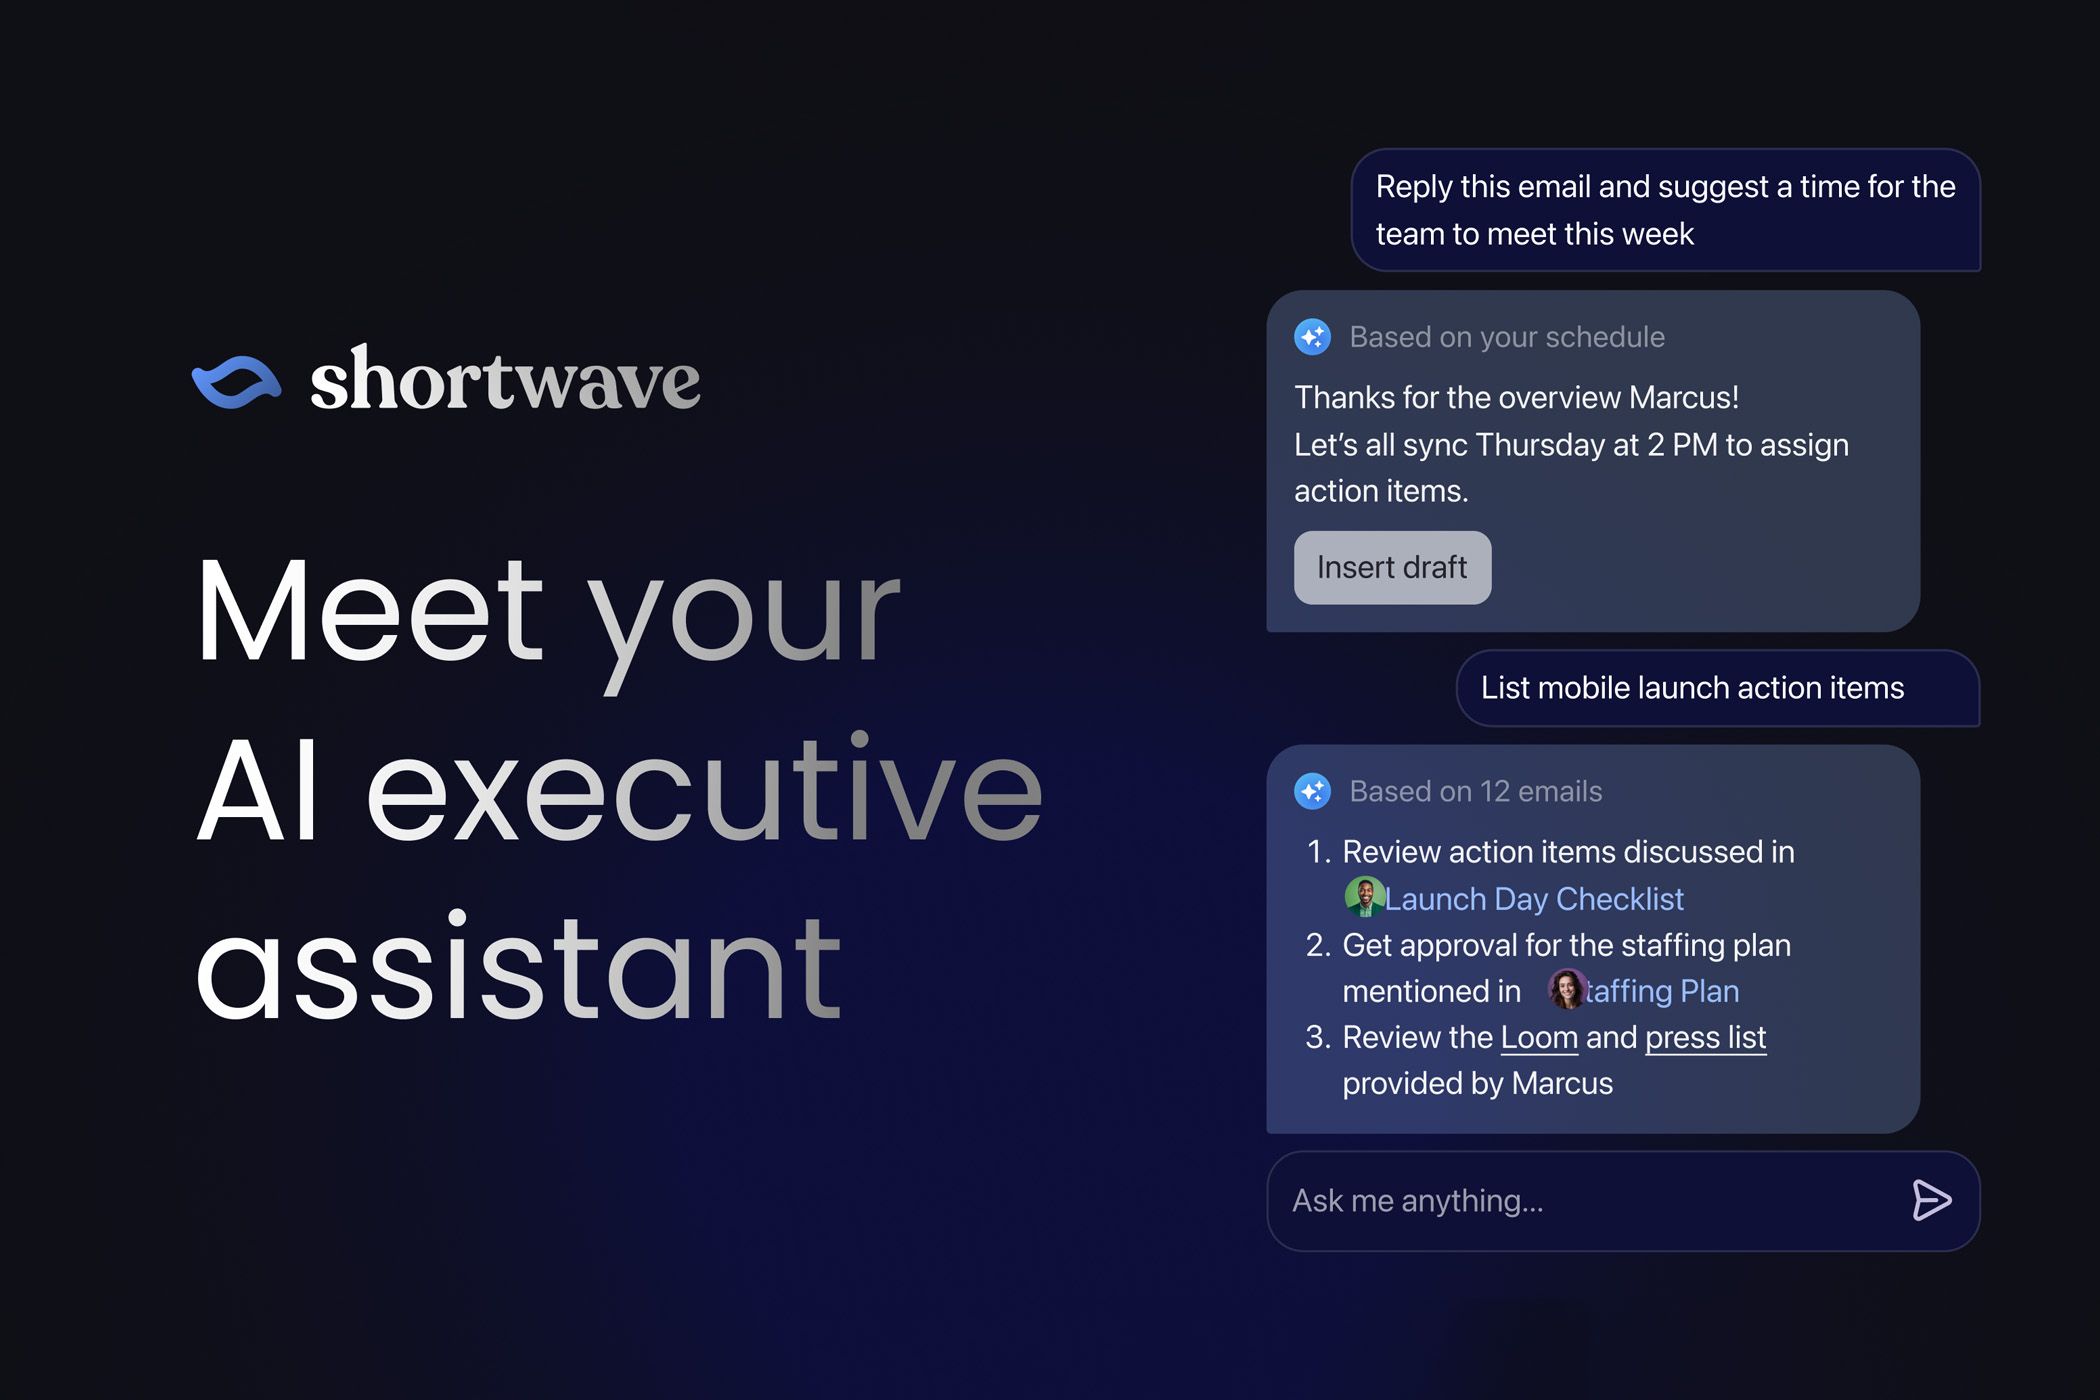 Shortwave Email is Adding an AI Assistant for Your Inbox